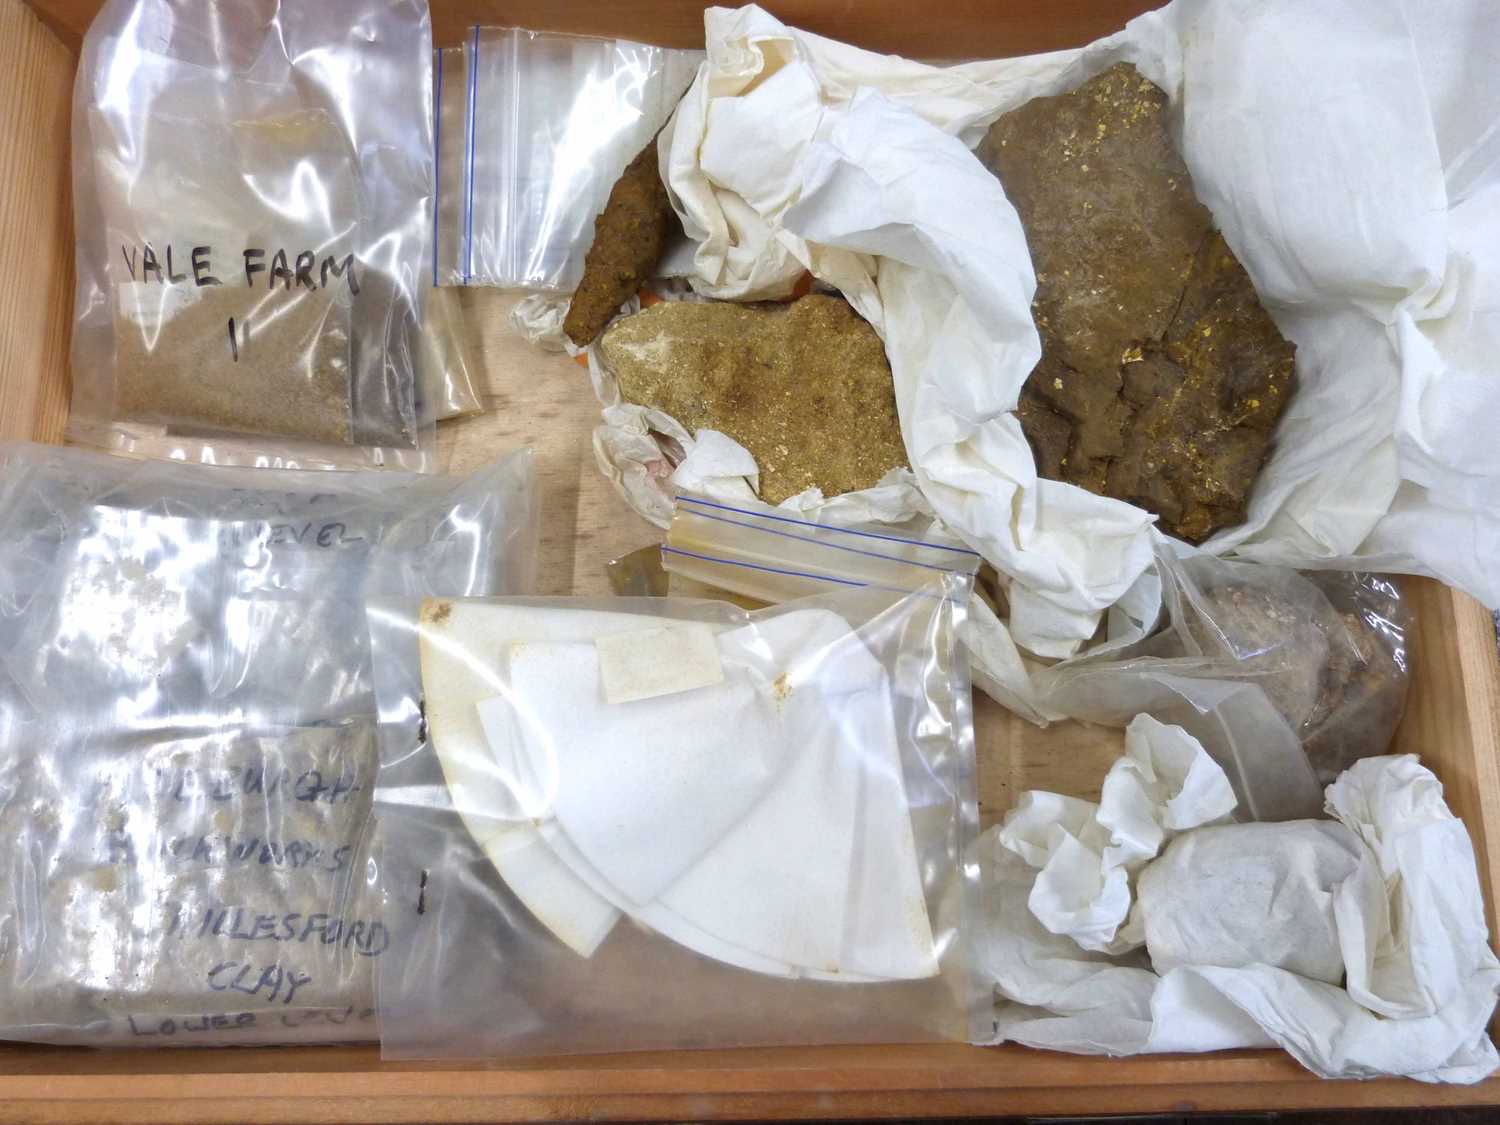 Collection of mineralogical and soil samples housed in wooden storage boxes - Image 5 of 12